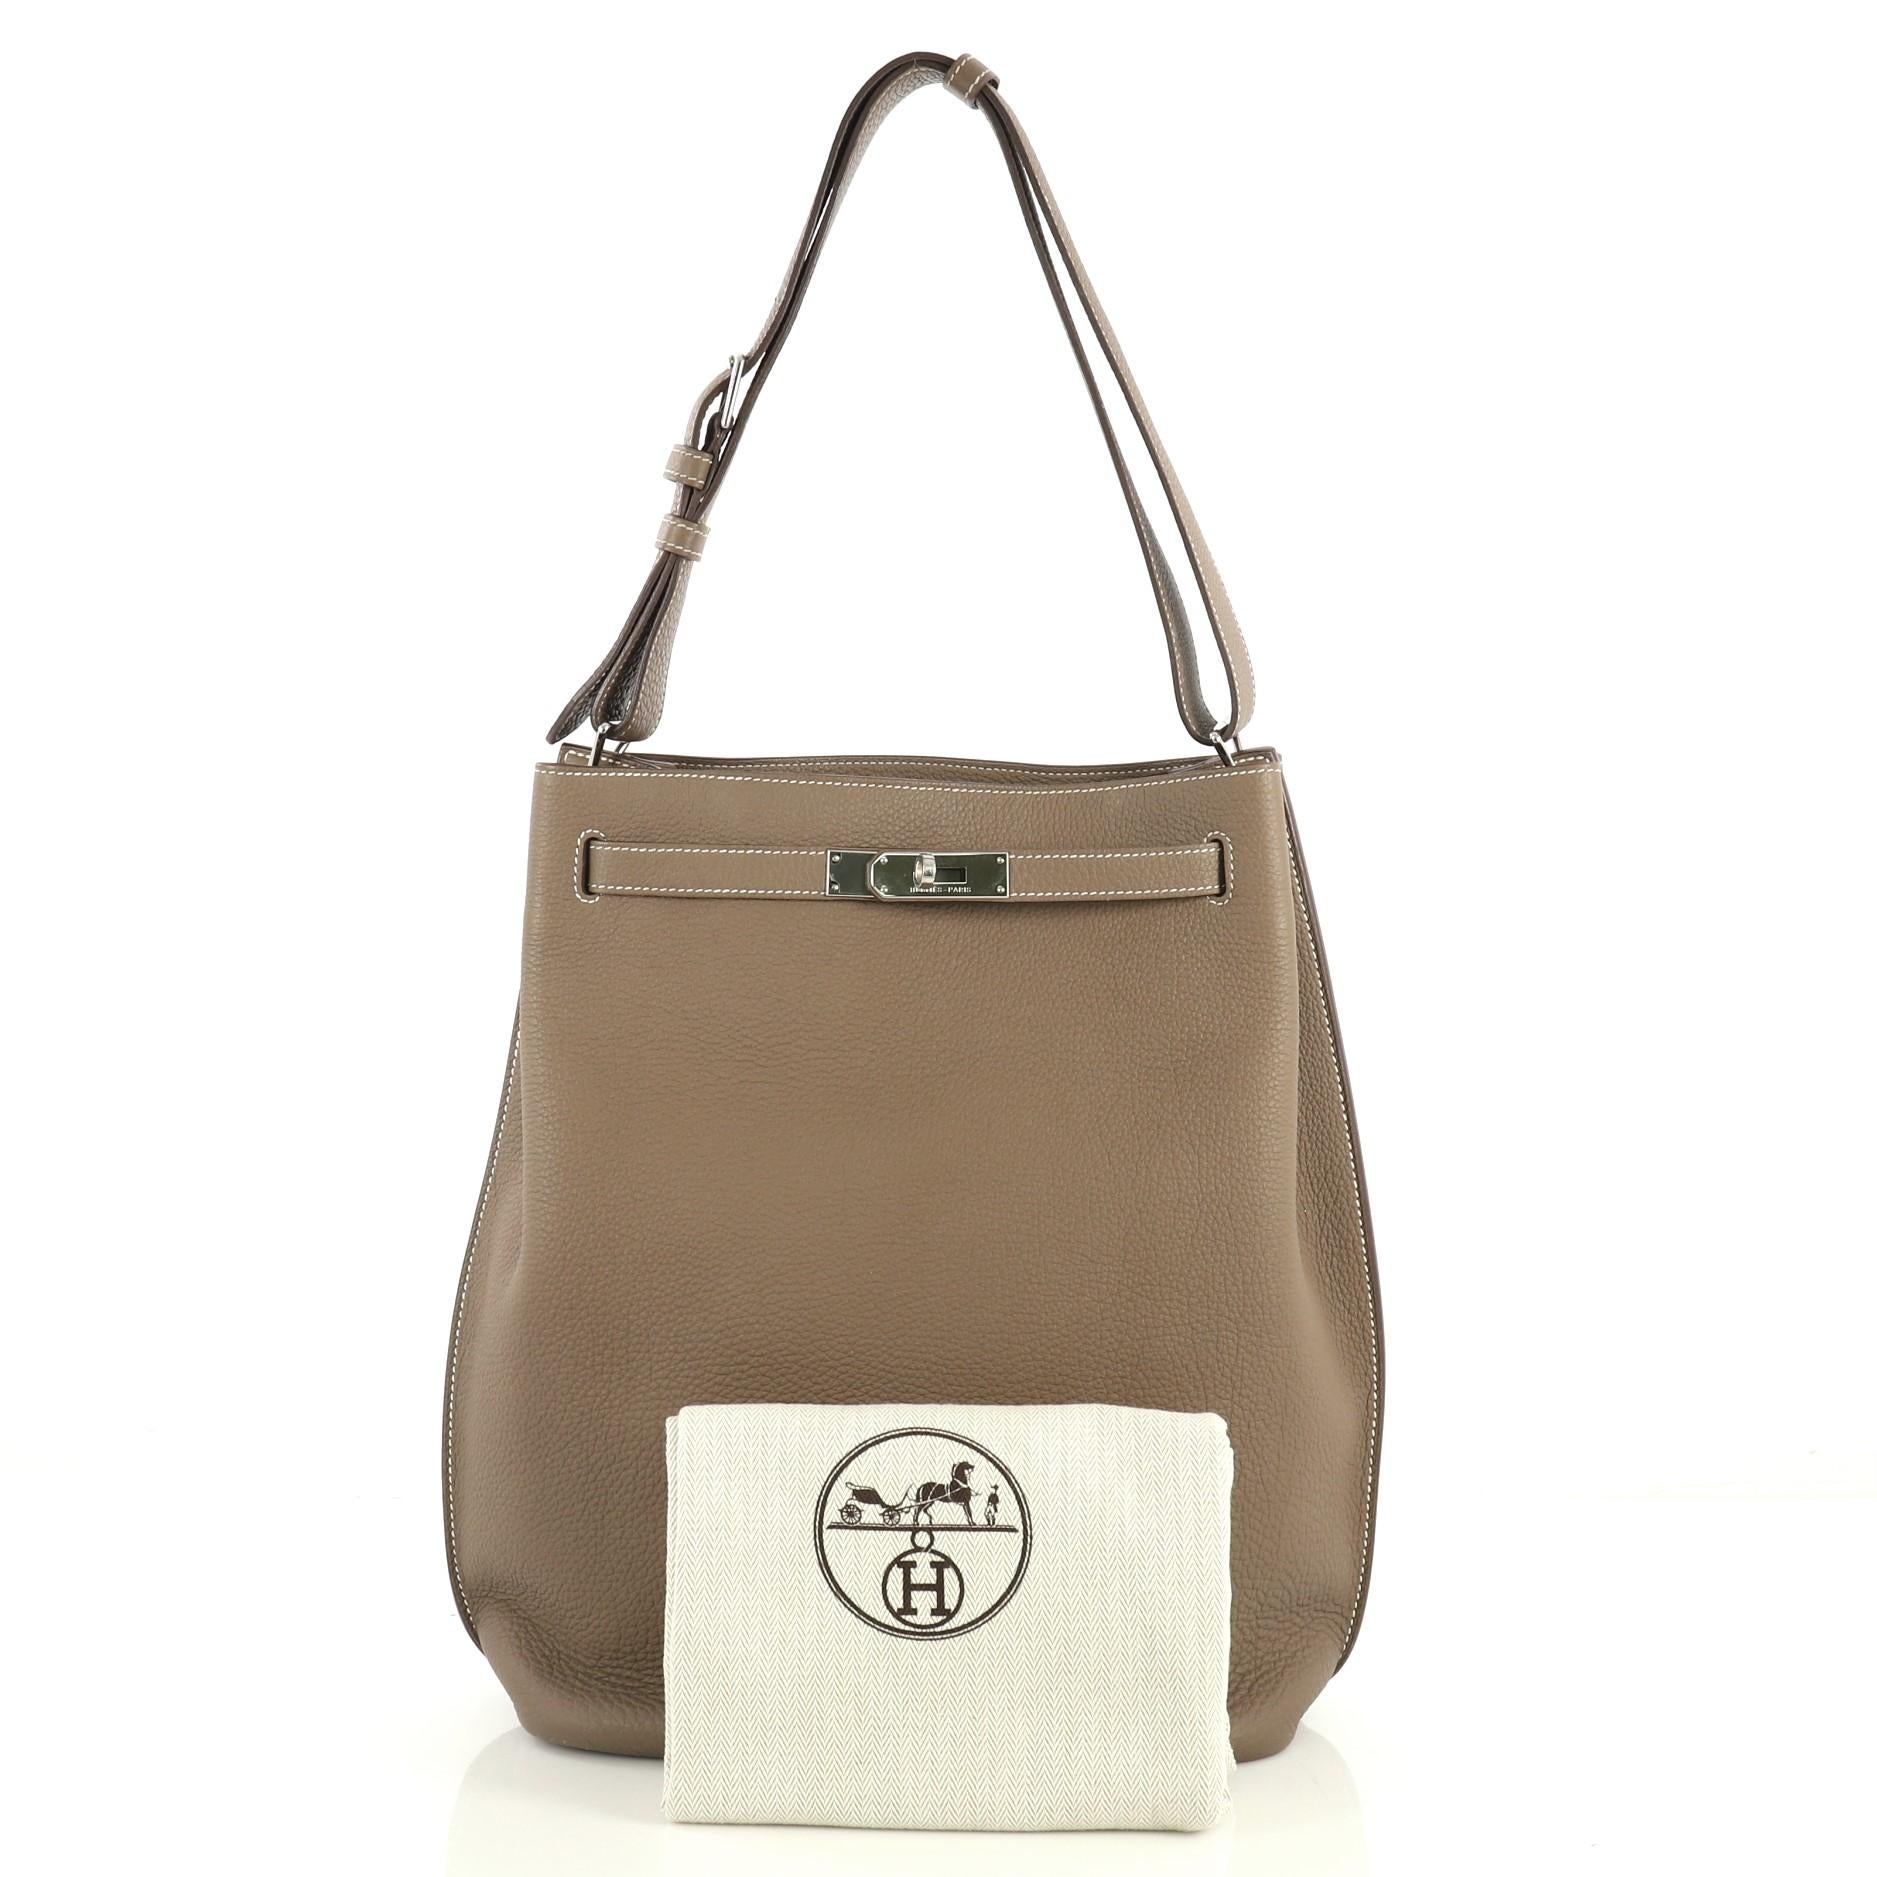 This Hermes So Kelly Handbag Togo 26, crafted in Etoupe neutral Togo leather, features an adjustable strap and palladium hardware. Its turn-lock closure opens to an Etoupe neutral Chevre leather interior with side zip and slip pockets. Date stamp